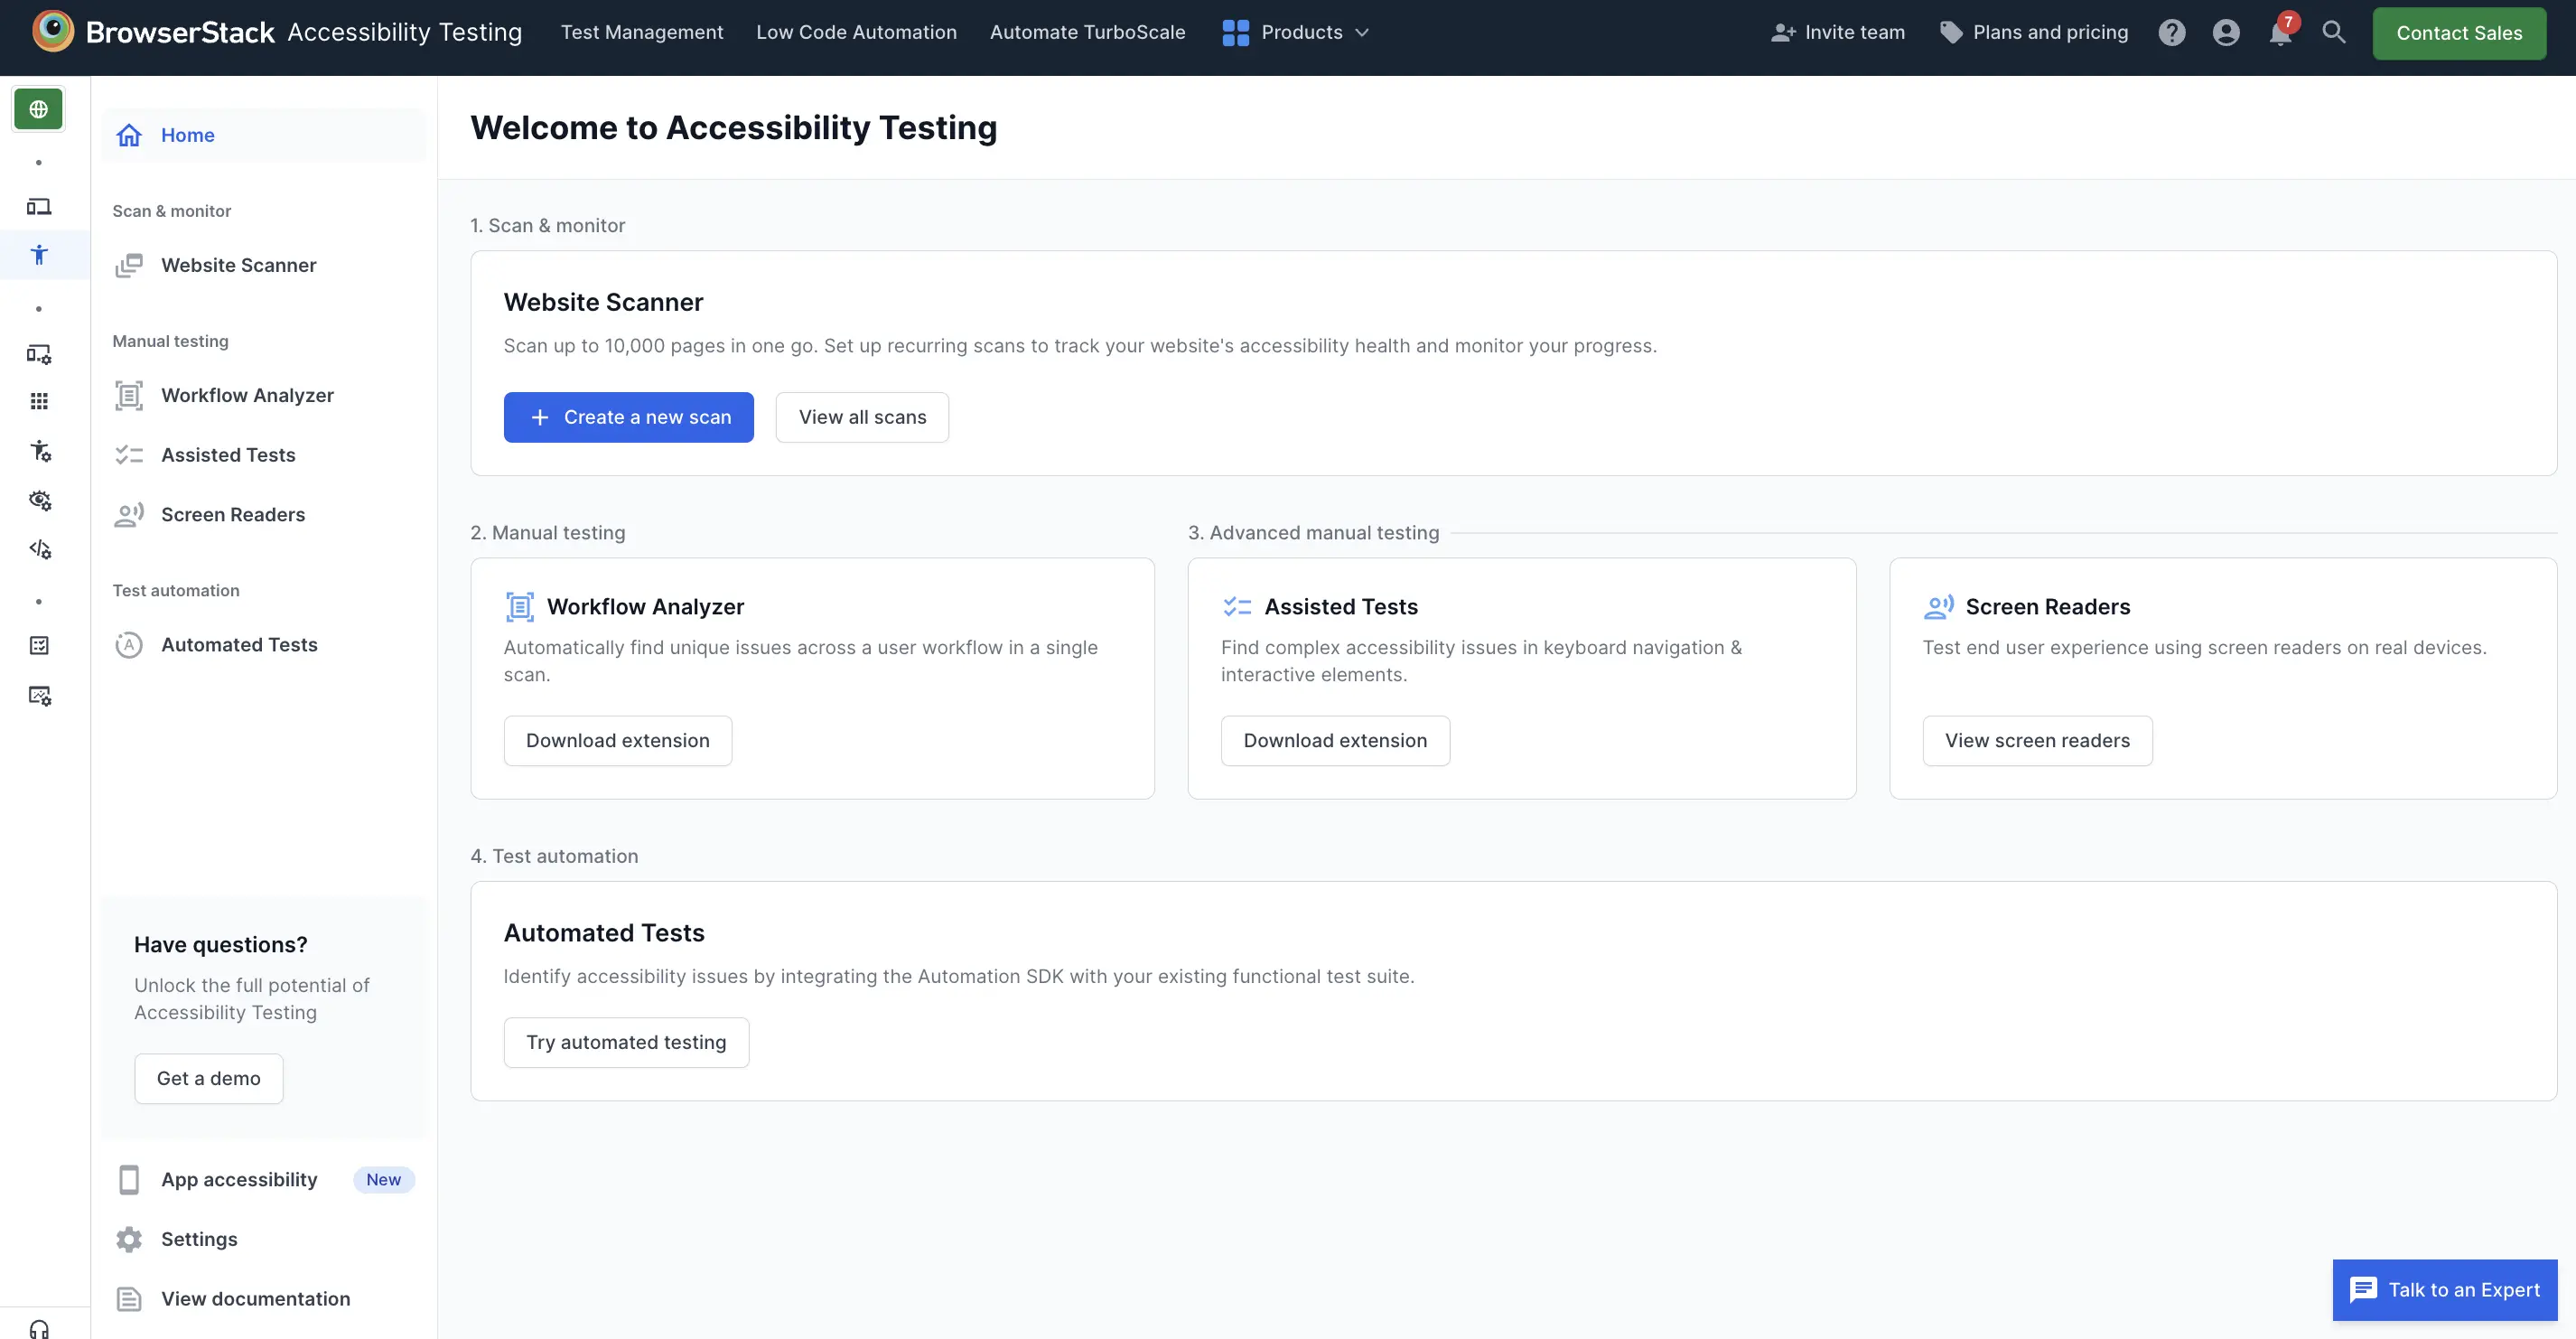 BrowserStack Accessibility Testing Homepage